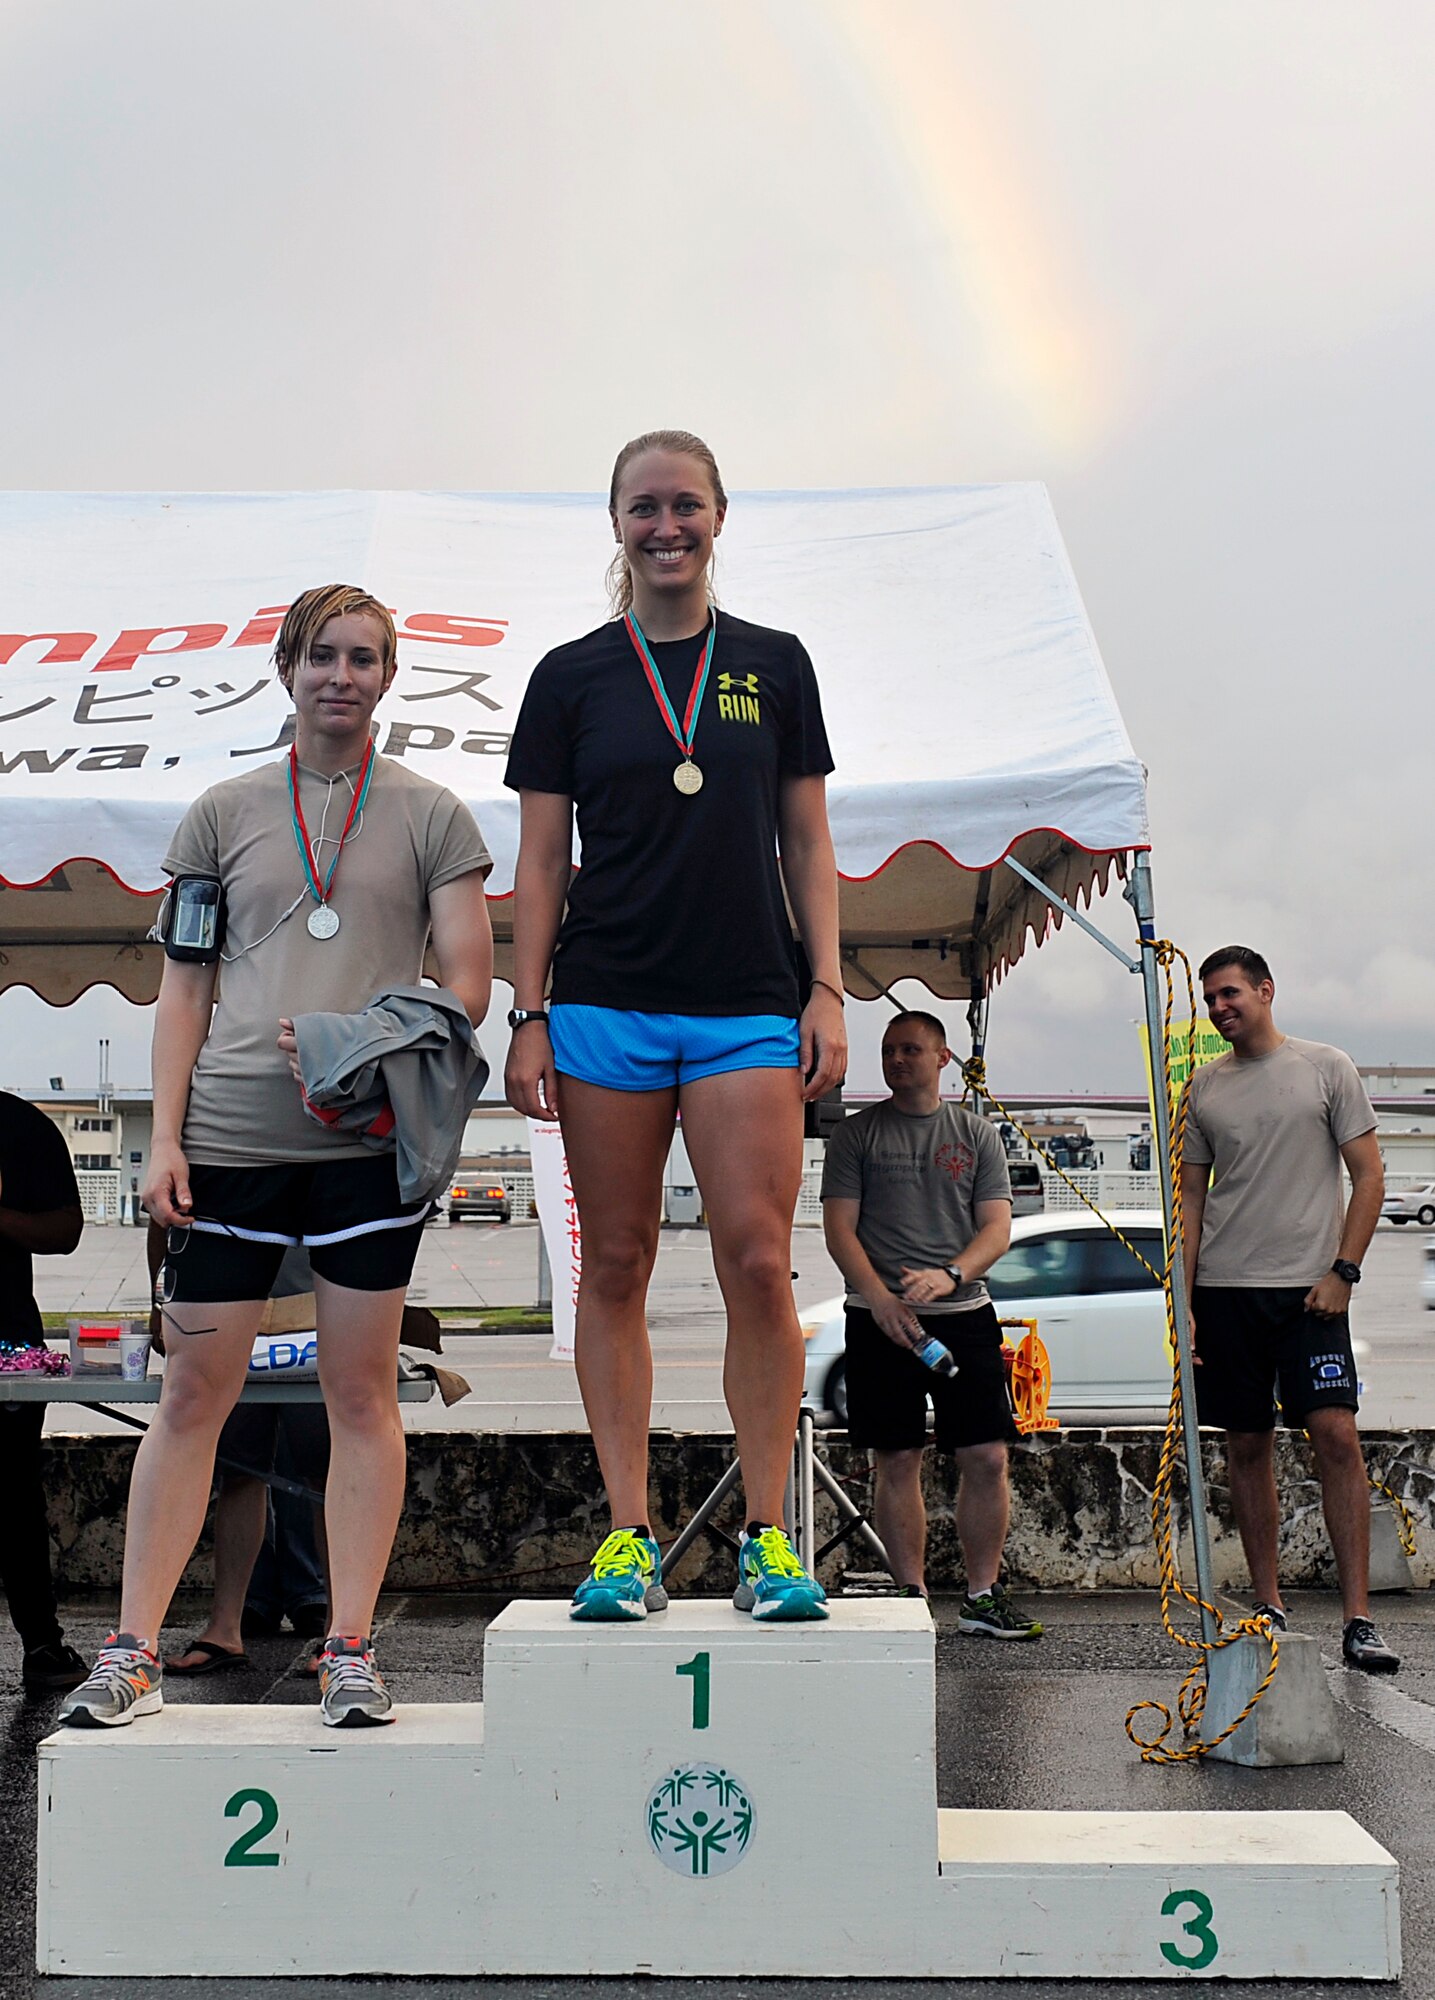 The 353rd Special Operations Group conducted a 5k fun run to support the Kadena Special Olympics on Kadena Air Base, Japan, Oct. 31, 2014. The first two female runners to cross the finish line of the KSO 5k fun run were: U.S. Air Force 1st Lt. Allison Paddock, 18th Comptroller Squadron budget analyst, in first place with 21 minutes, 45 seconds; and Airman 1st Class Stephanie Lopez, 353rd Special Operations Support Squadron network systems operator, in second place with 22:25. (U.S. Air Force photo by Naoto Anazawa)